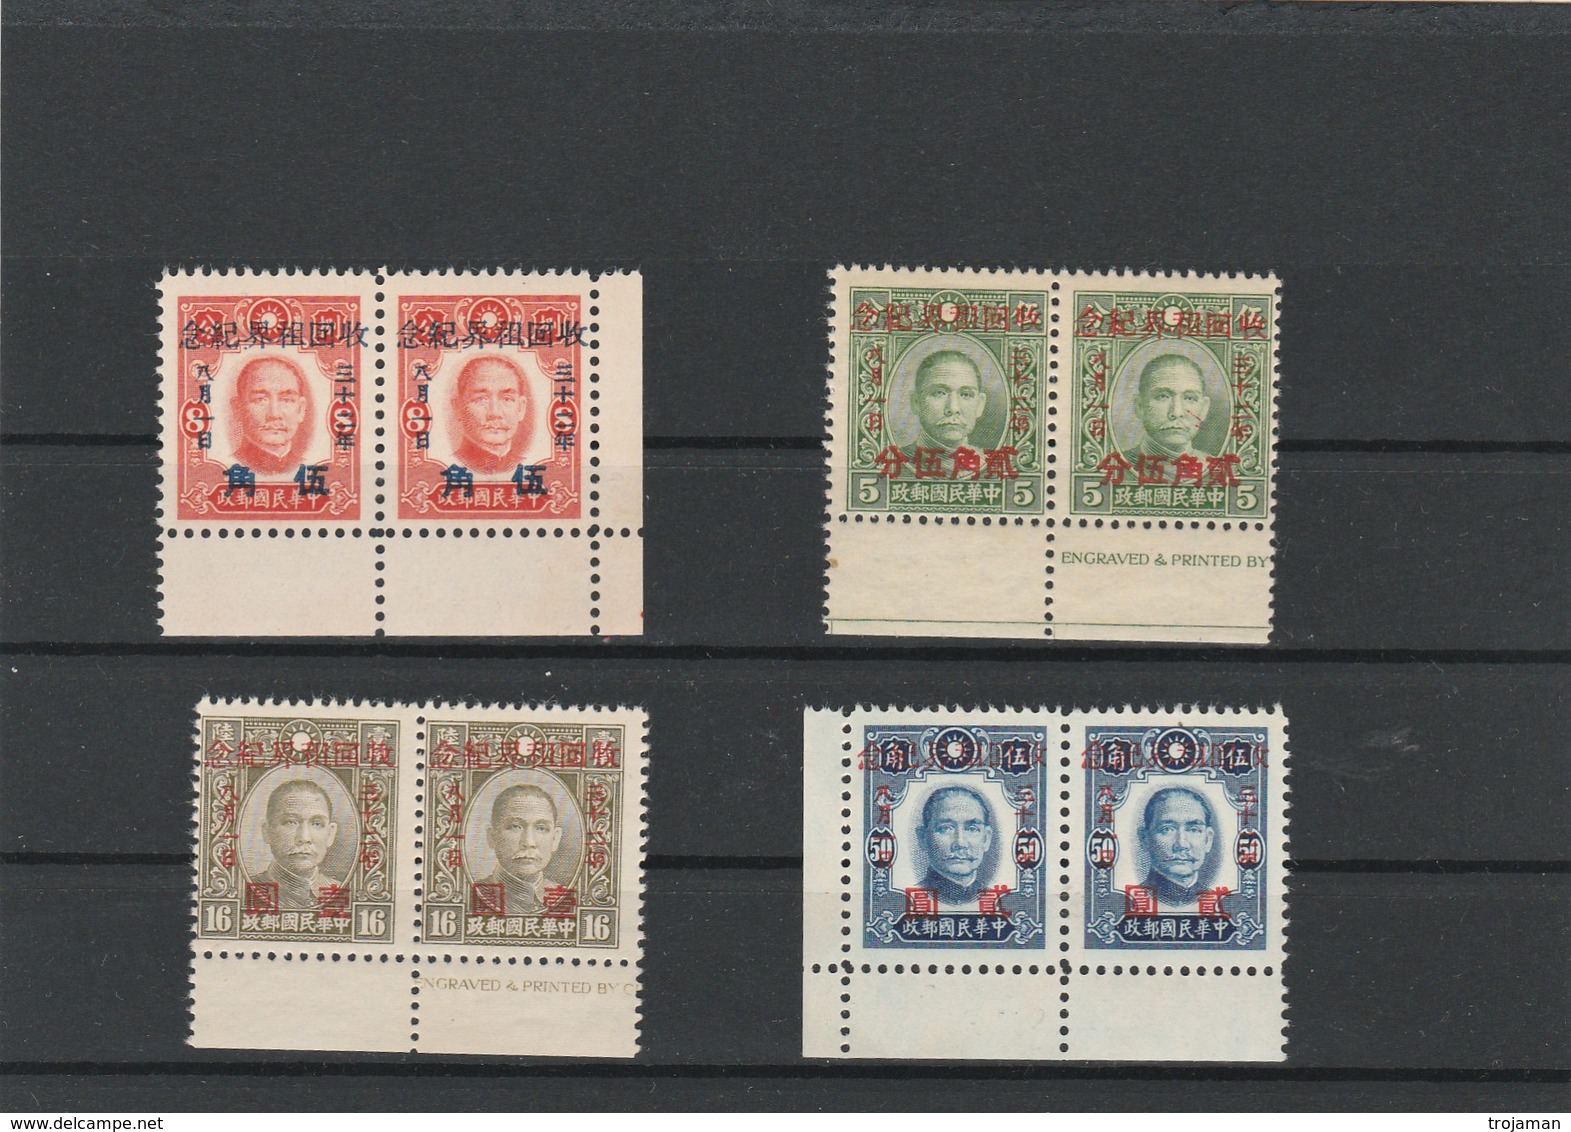 EX-P-19-03-10 CHINA JAPAN OCC. 2 SETS IN PAIR MICHEL # 7-10 MNH. - 1941-45 Chine Du Nord